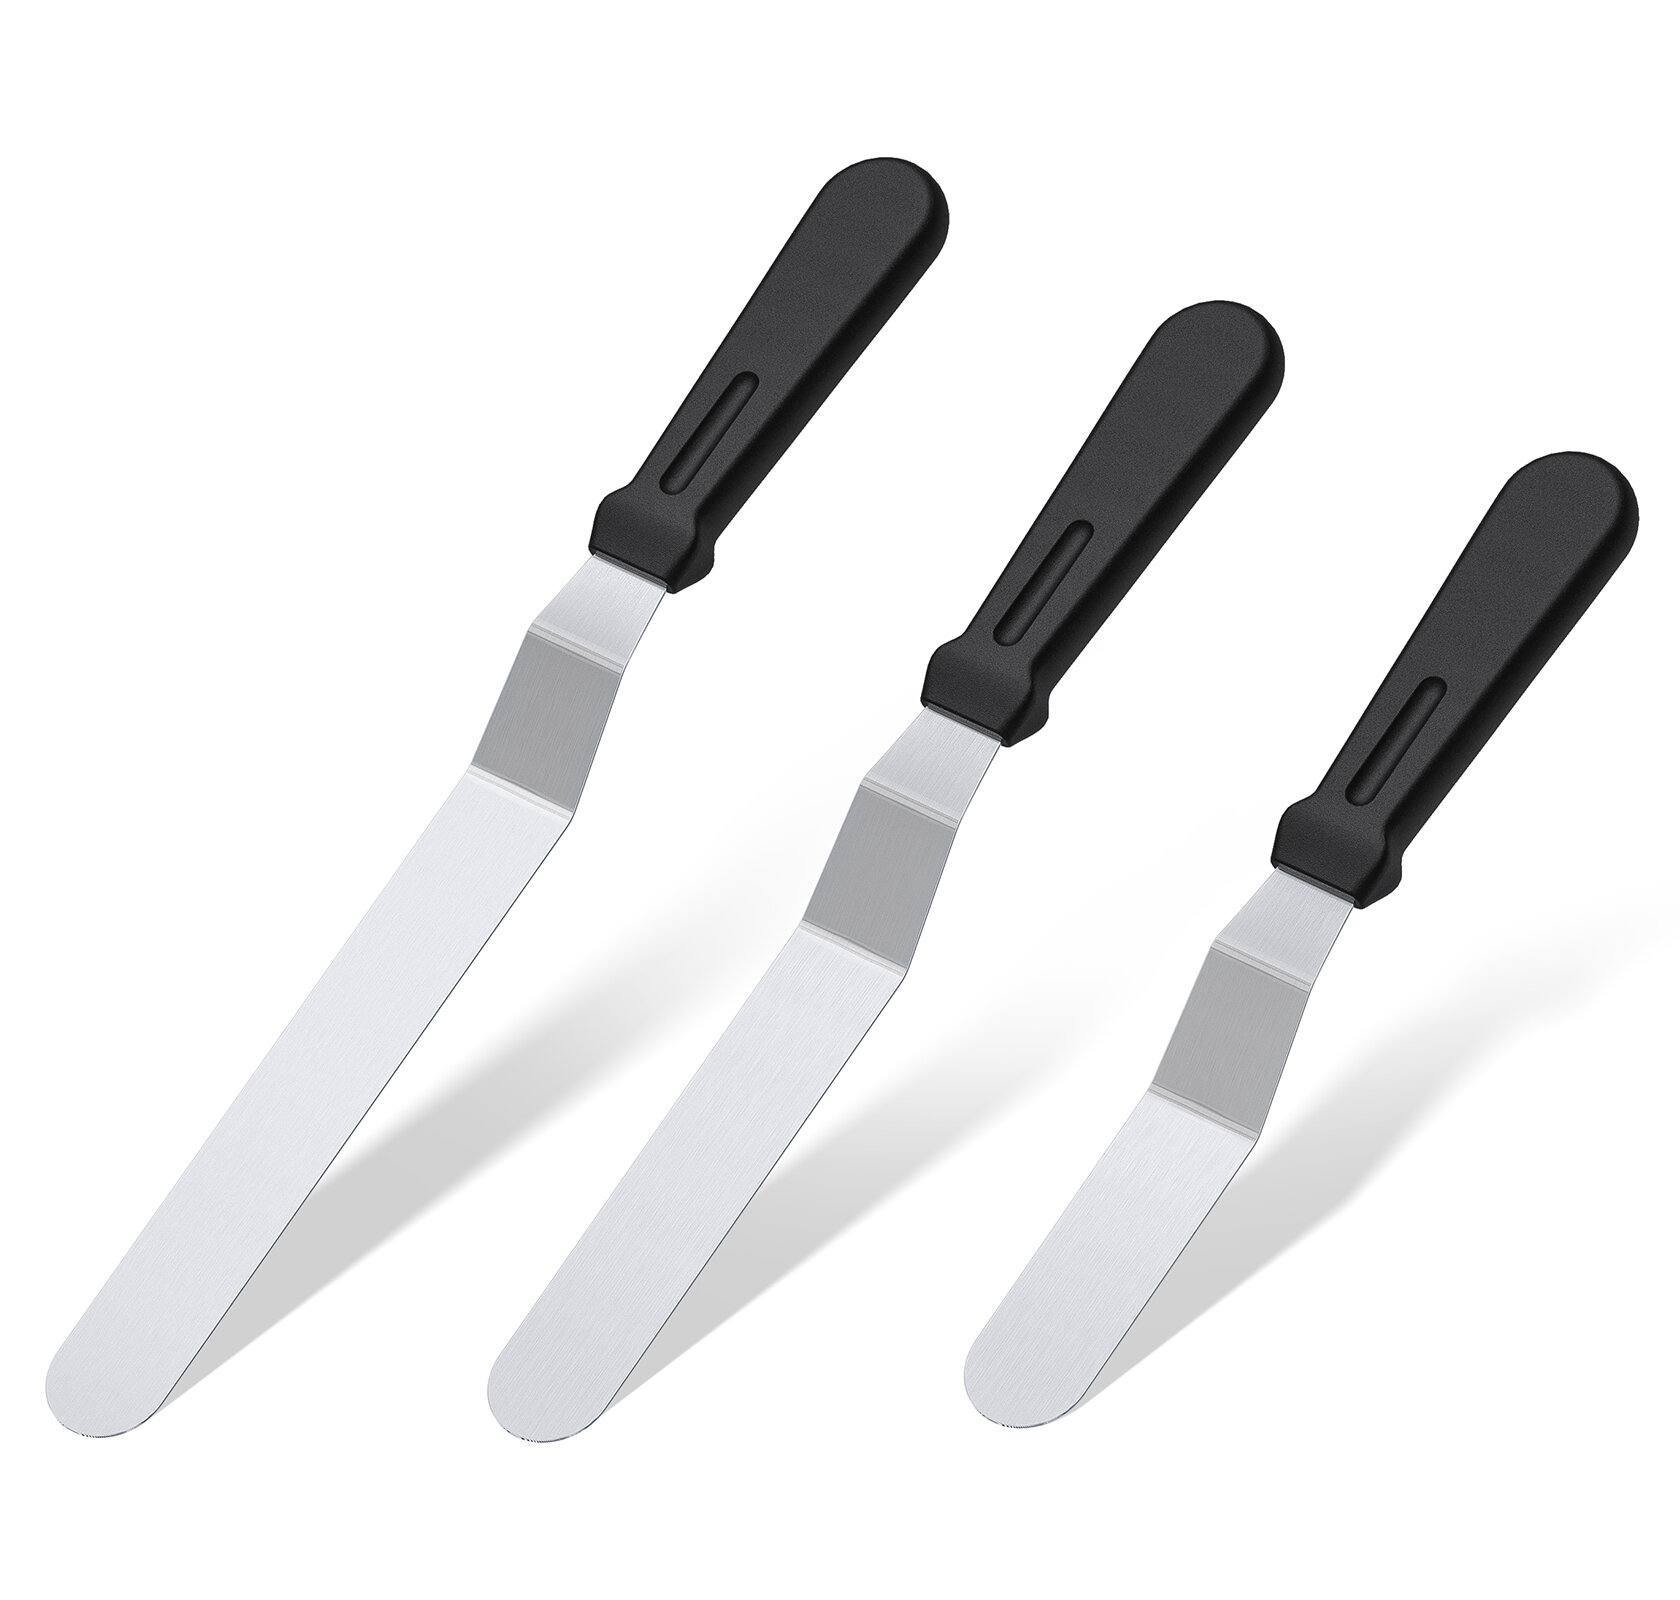 Offset Spatula Set of 3 (6, 8 and 10 Inch Blade) Dishwasher Safe Stainless  Steel and PP Plastic Handle - Angled Frosting Icing Spatula for Cake